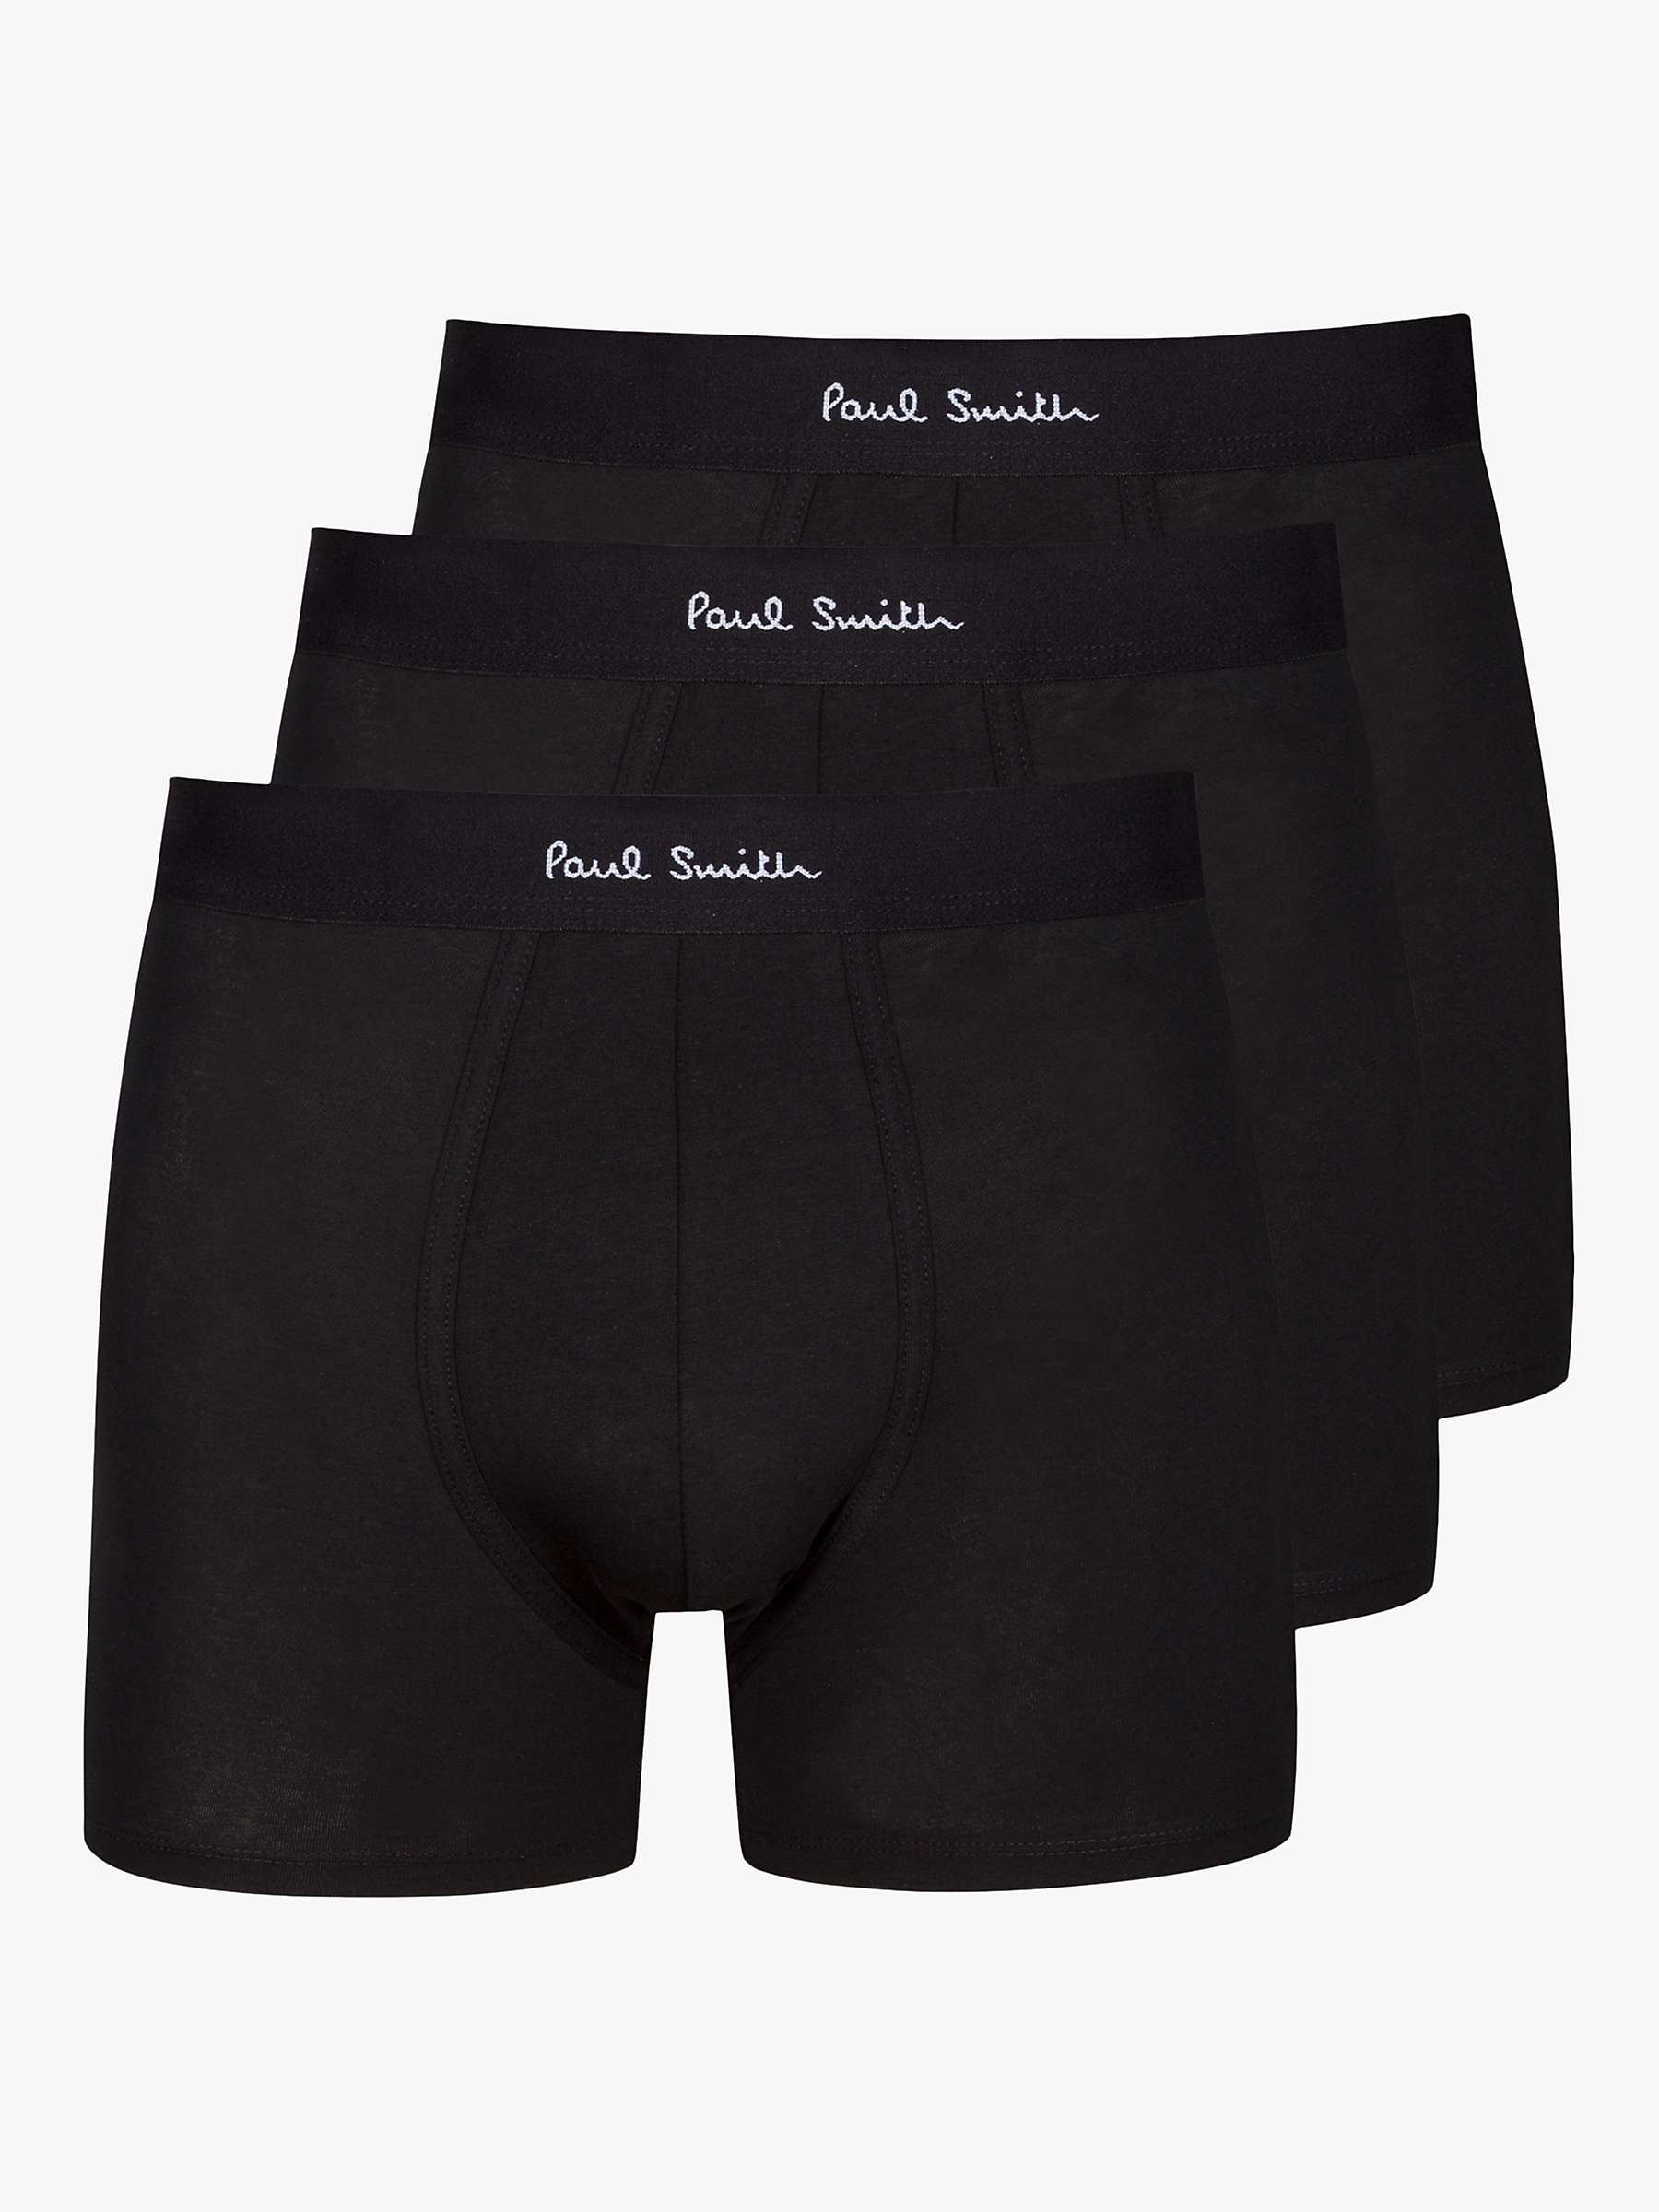 Buy Paul Smith Stretch Cotton Long Trunks, Pack of 3, Black Online at johnlewis.com